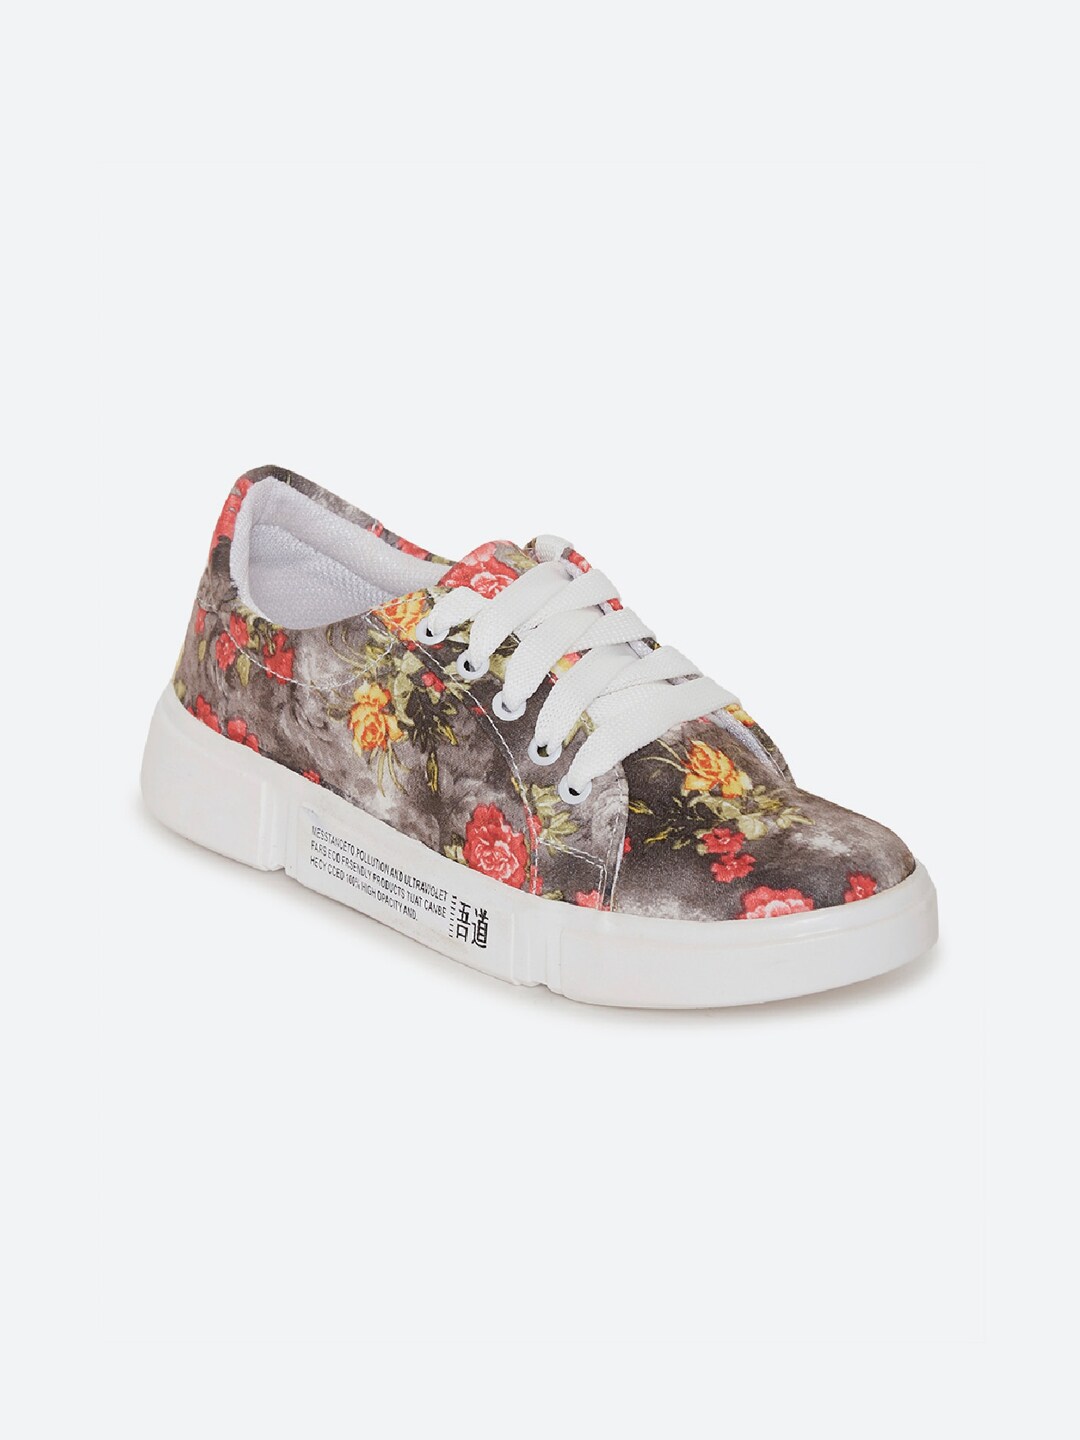 IMT Women Multicoloured Printed Driving Shoes Price in India